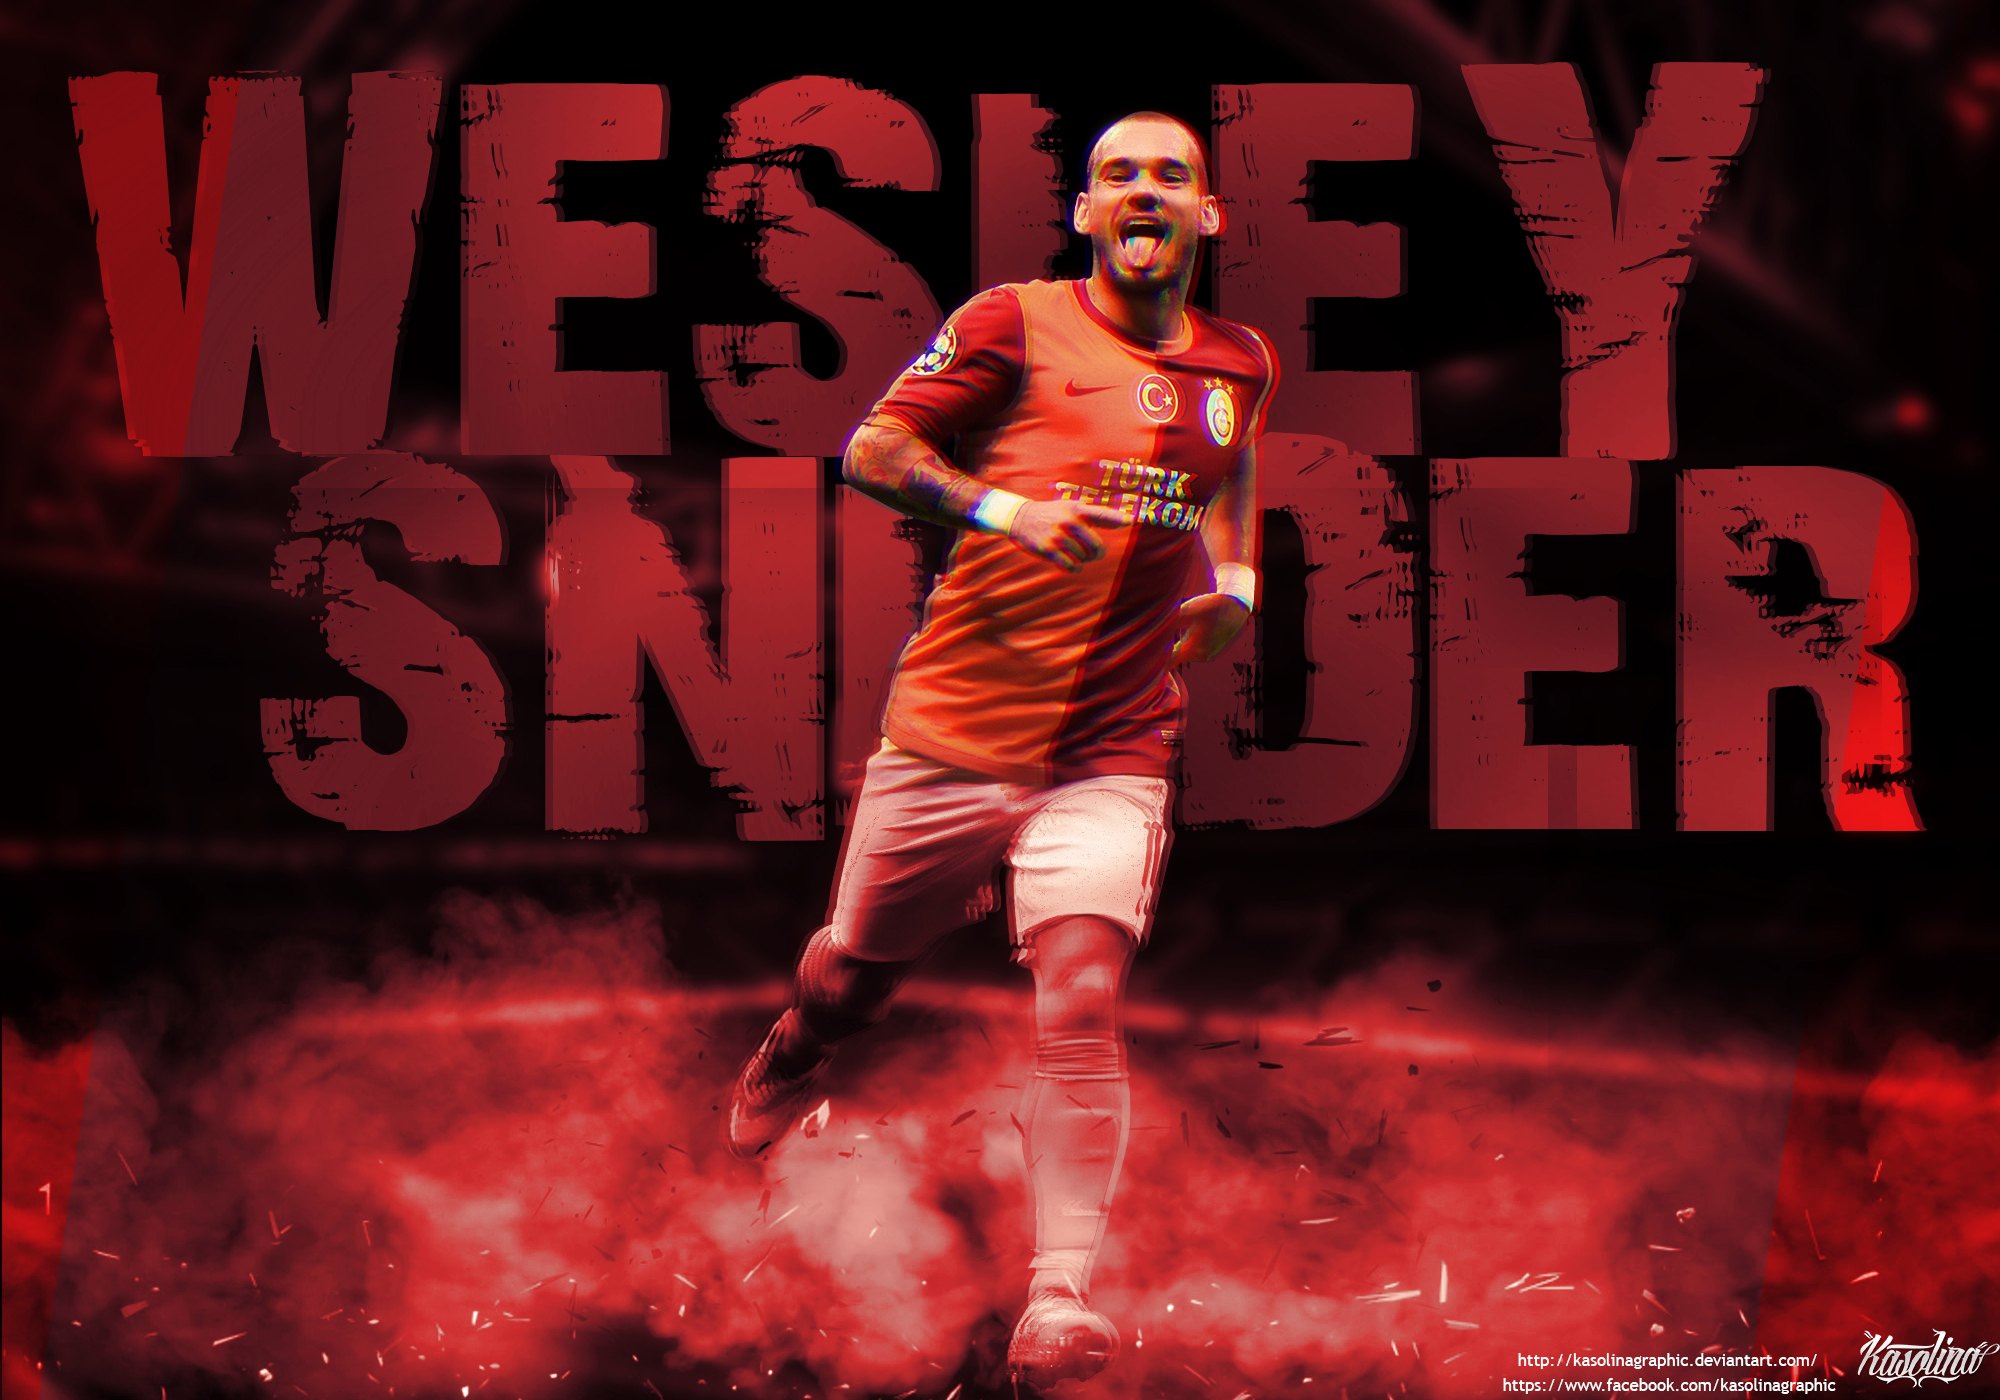 Wesley Sneijder Wallpaper By Kasolinagraphic